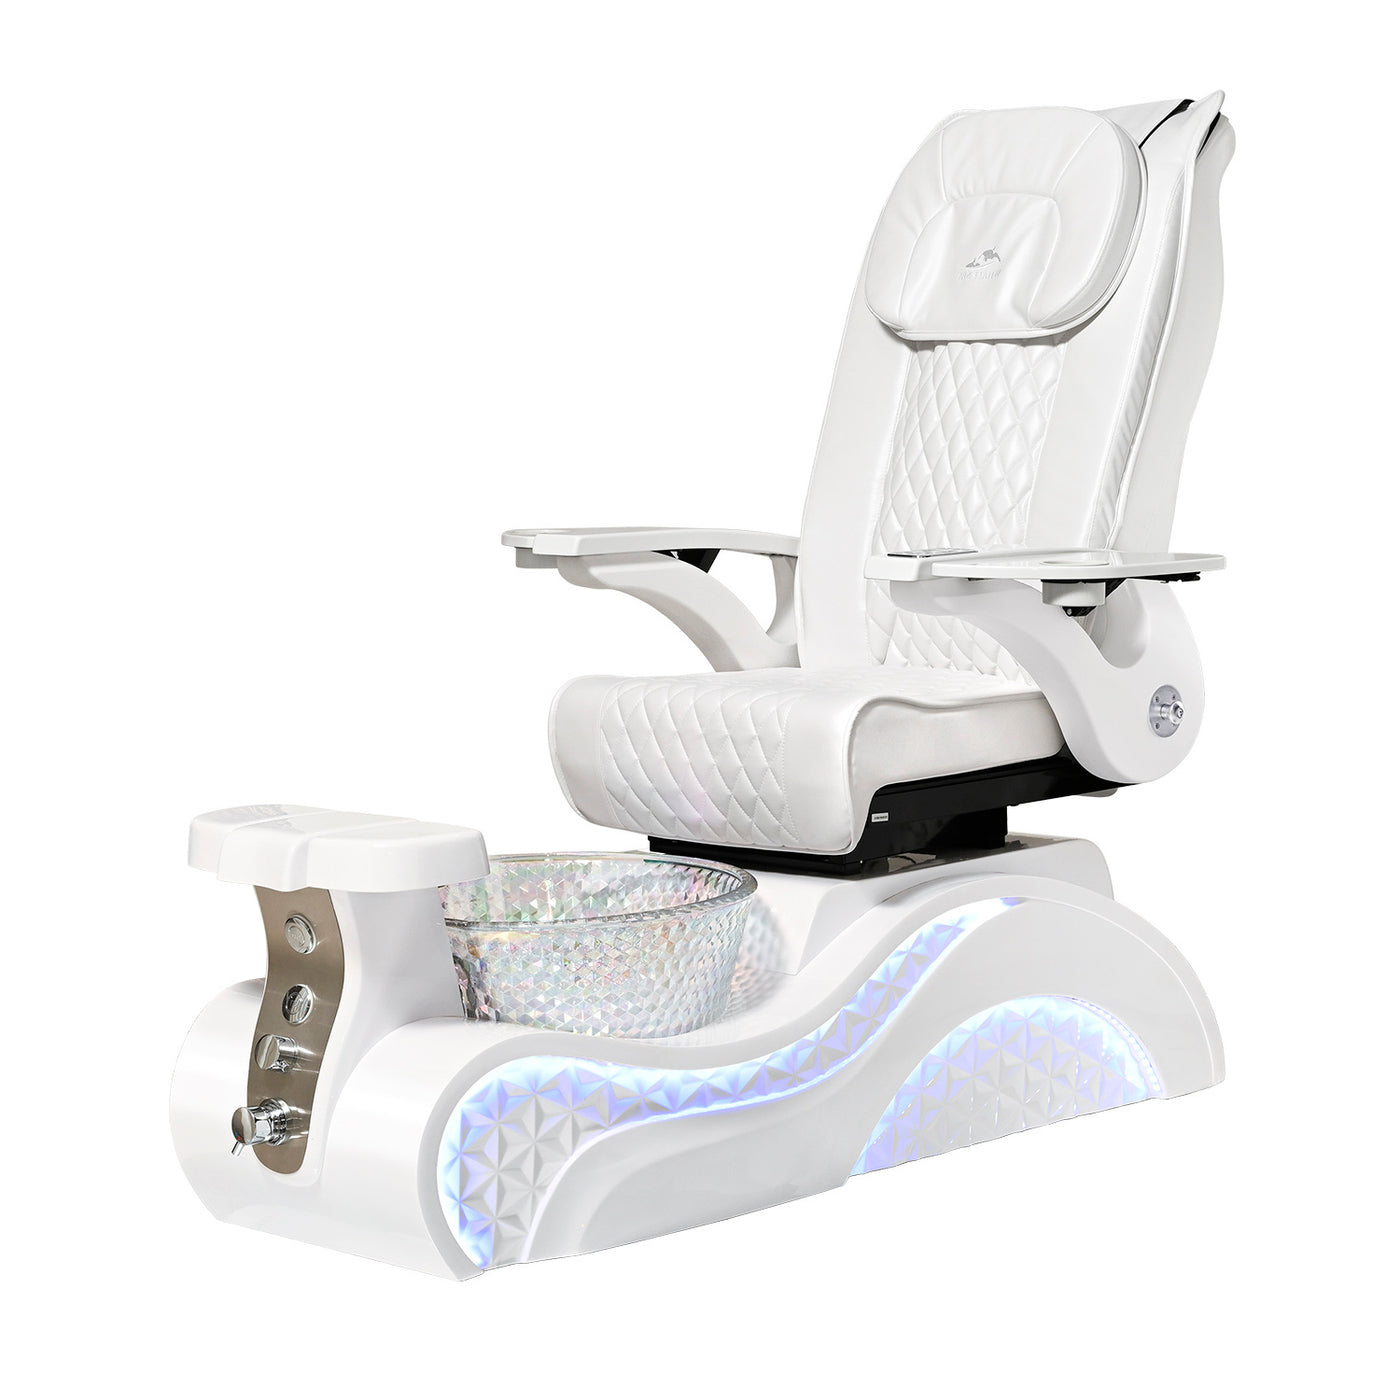 Lucent II Pedicure Chair Package Deal